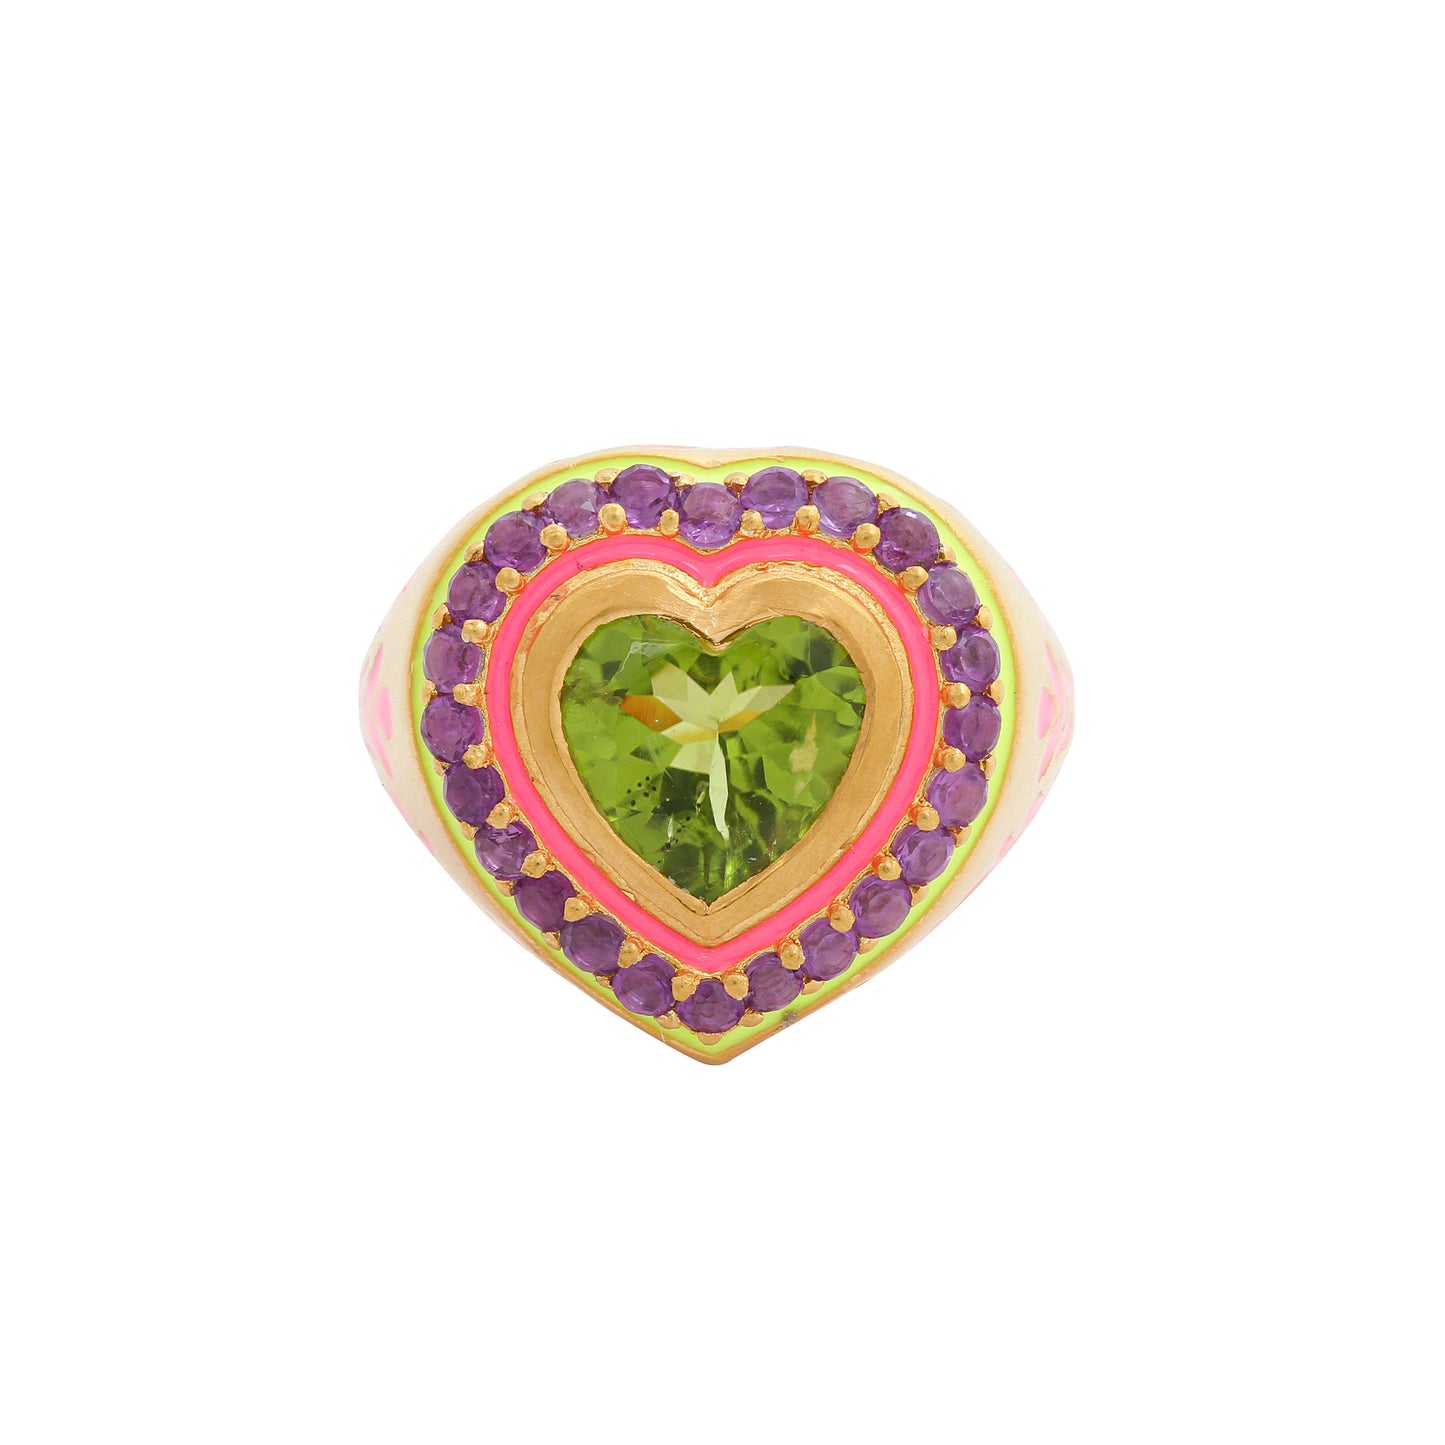 image of firework heart ring front facing on white background